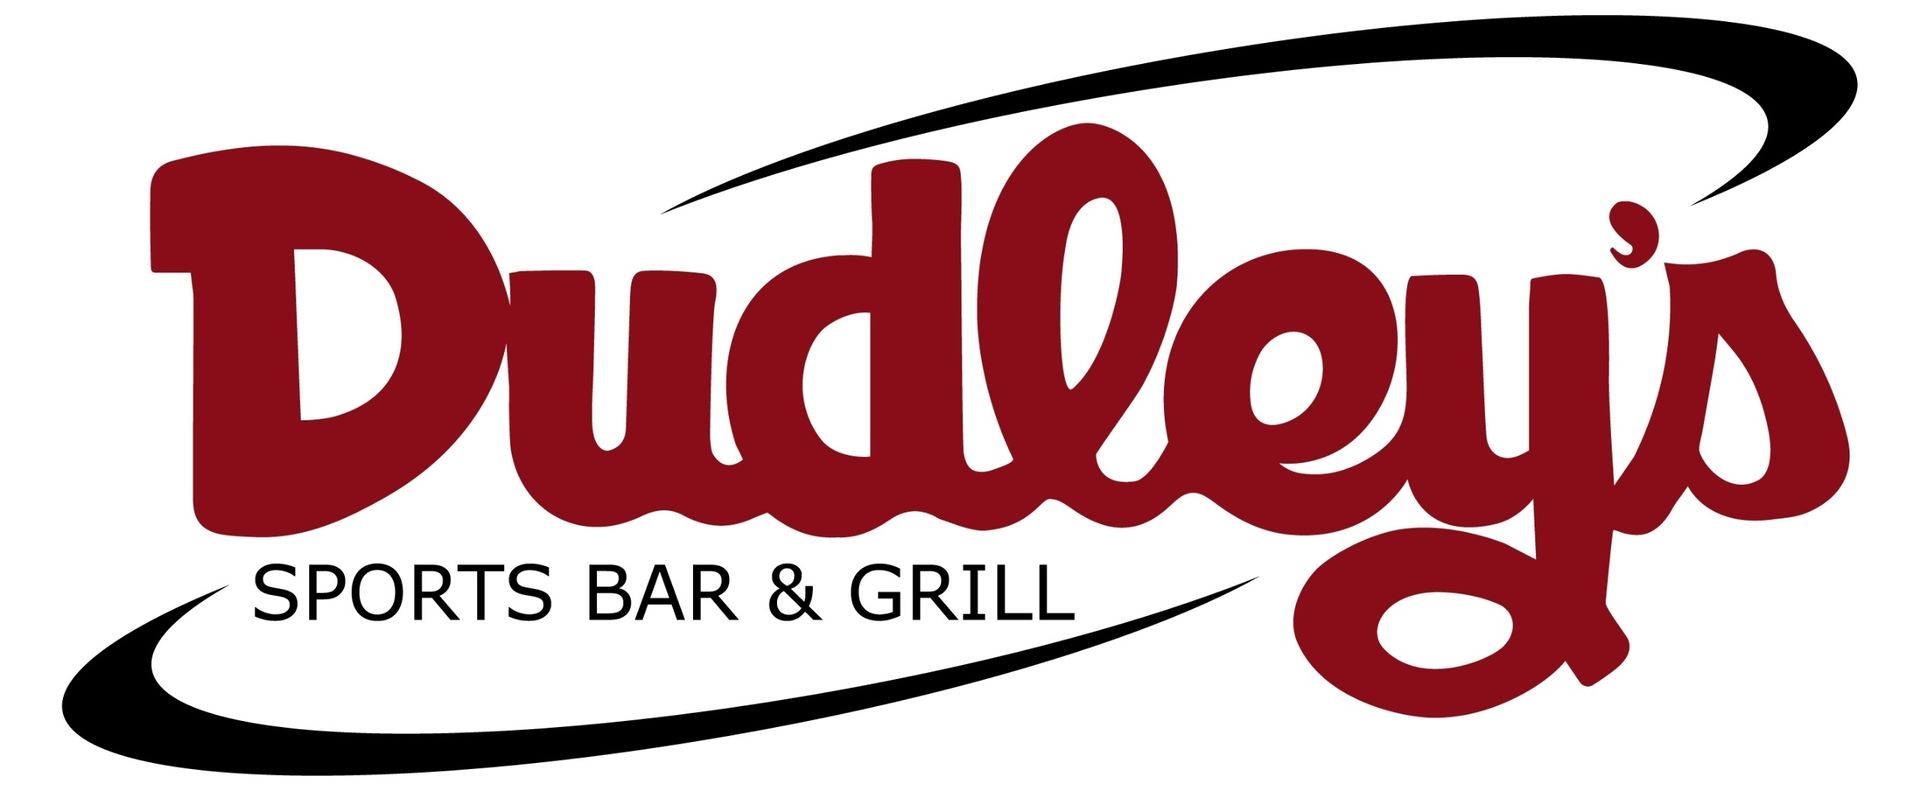 Dudley's Sports Bar and Grill